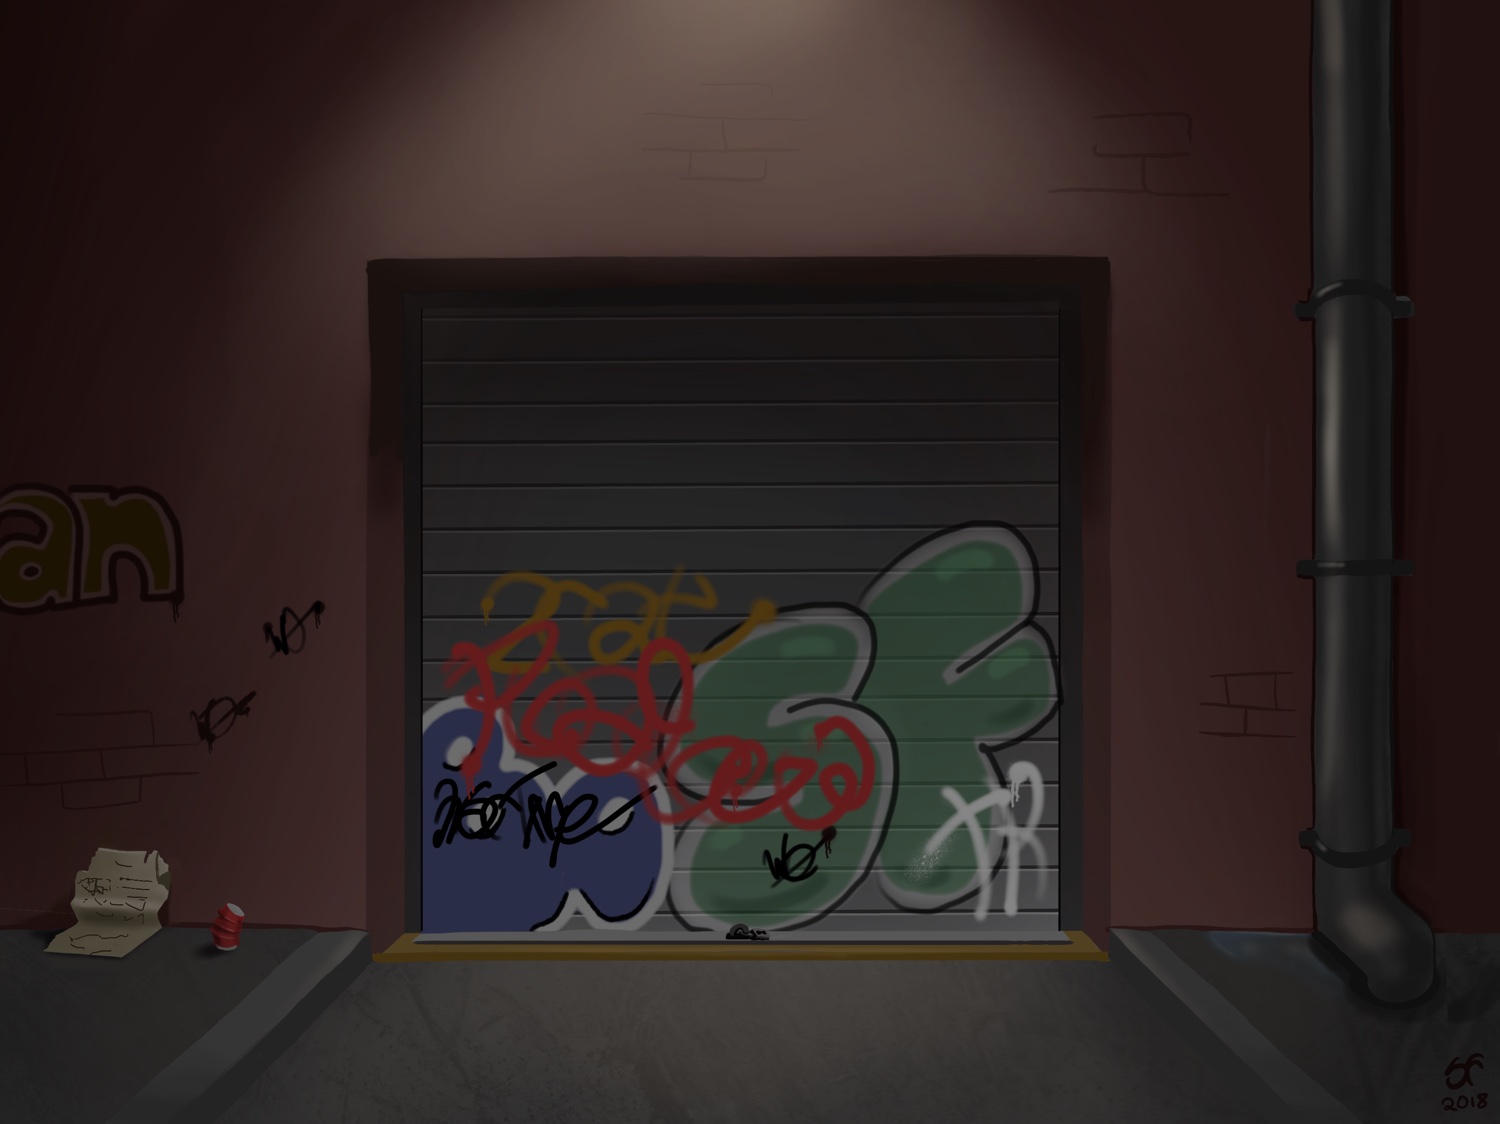 Illustration of a dingy, grimy back alley garage. There’s graffiti on the garage door.